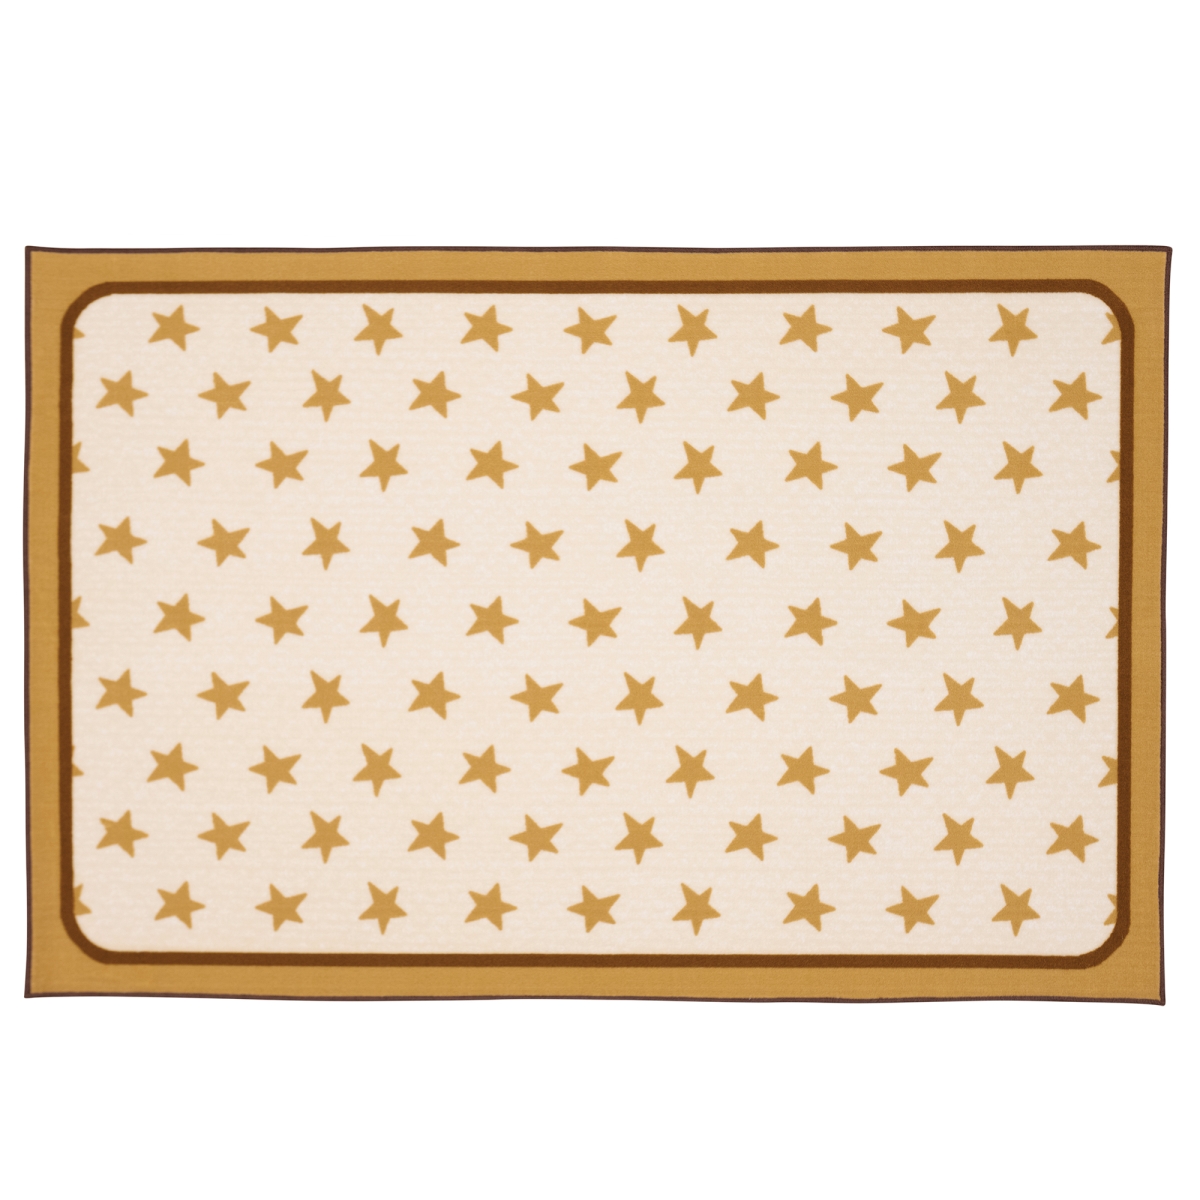 Picture of Carpets for Kids 37.67 3 x 4 ft. 6 in. Super Stars Decorative Rectangle Rug - Tan